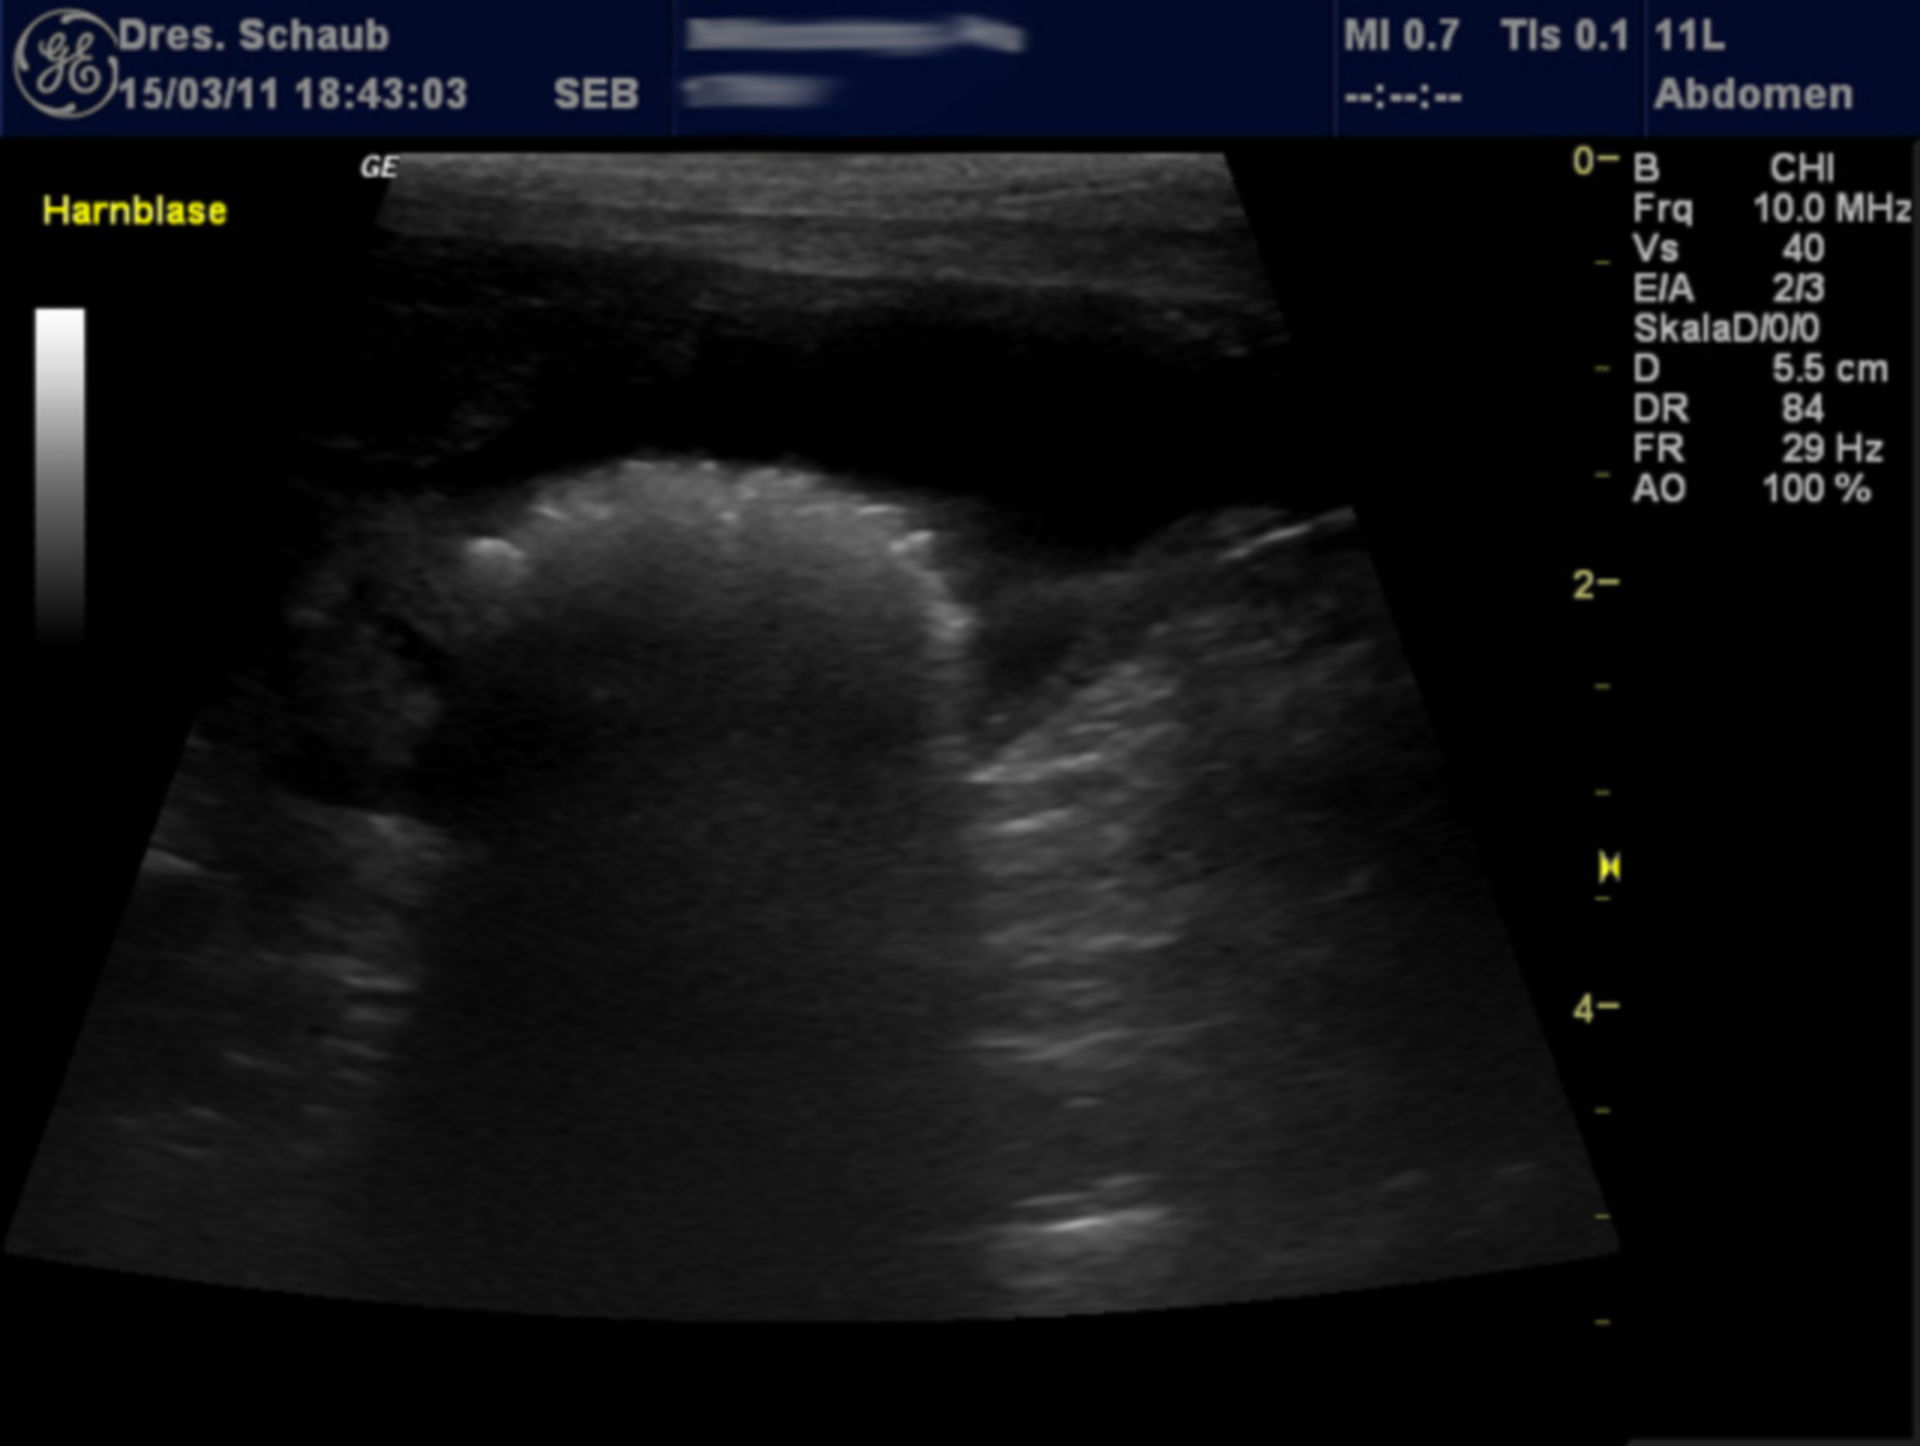 Sonography of urinary stone